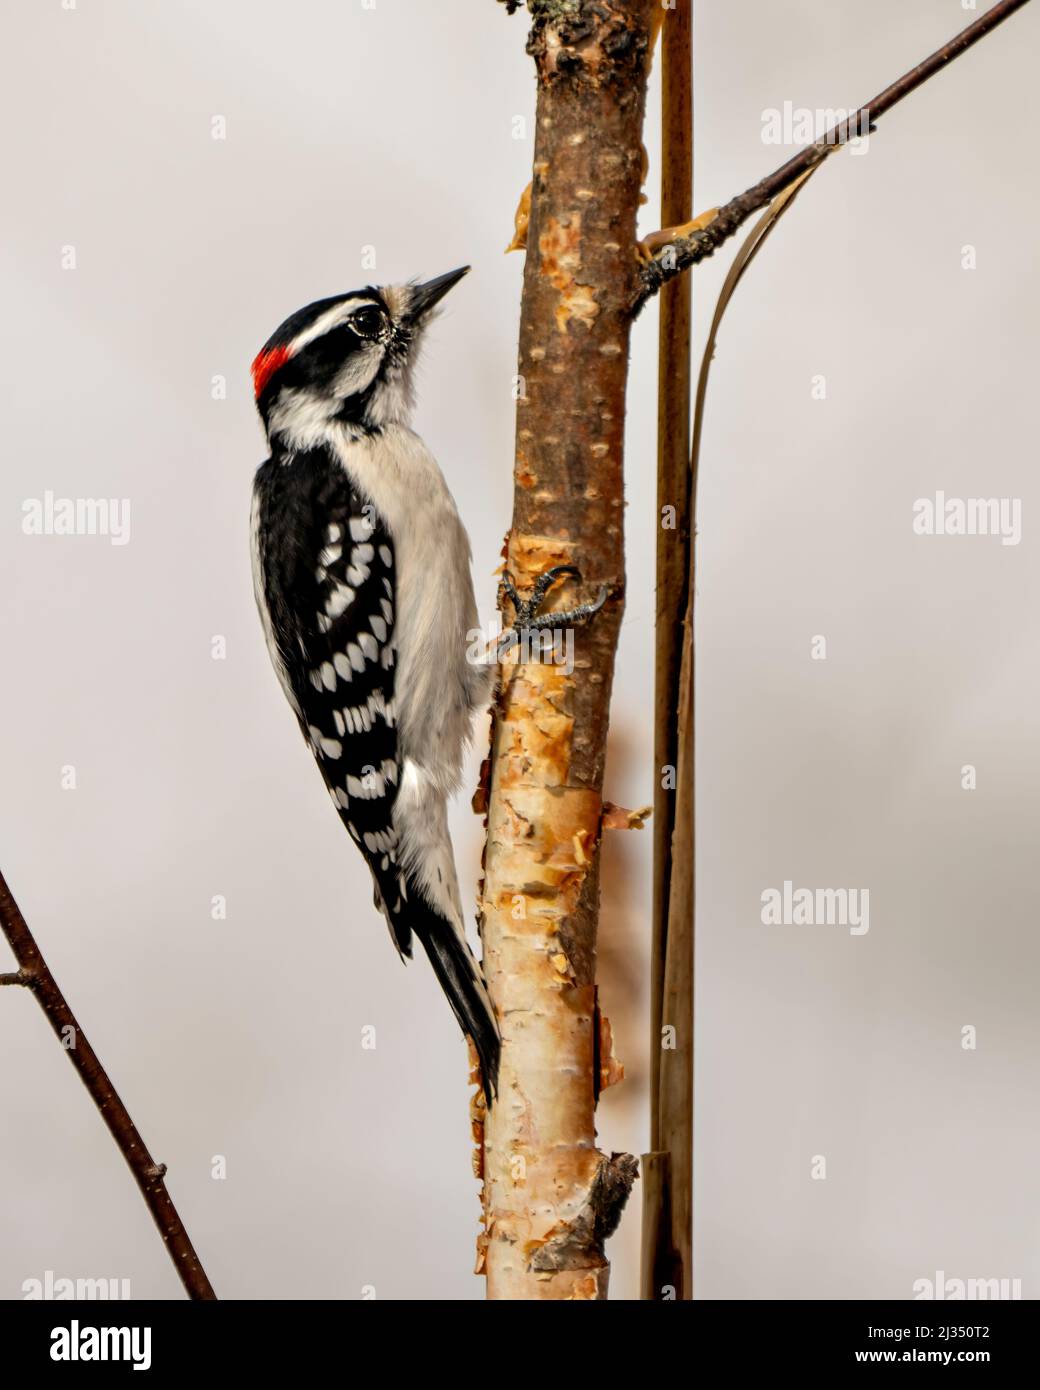 Woodpecker male on a branch with a blur white background in its environment and habitat surrounding displaying white and black feather plumage wings. Stock Photo